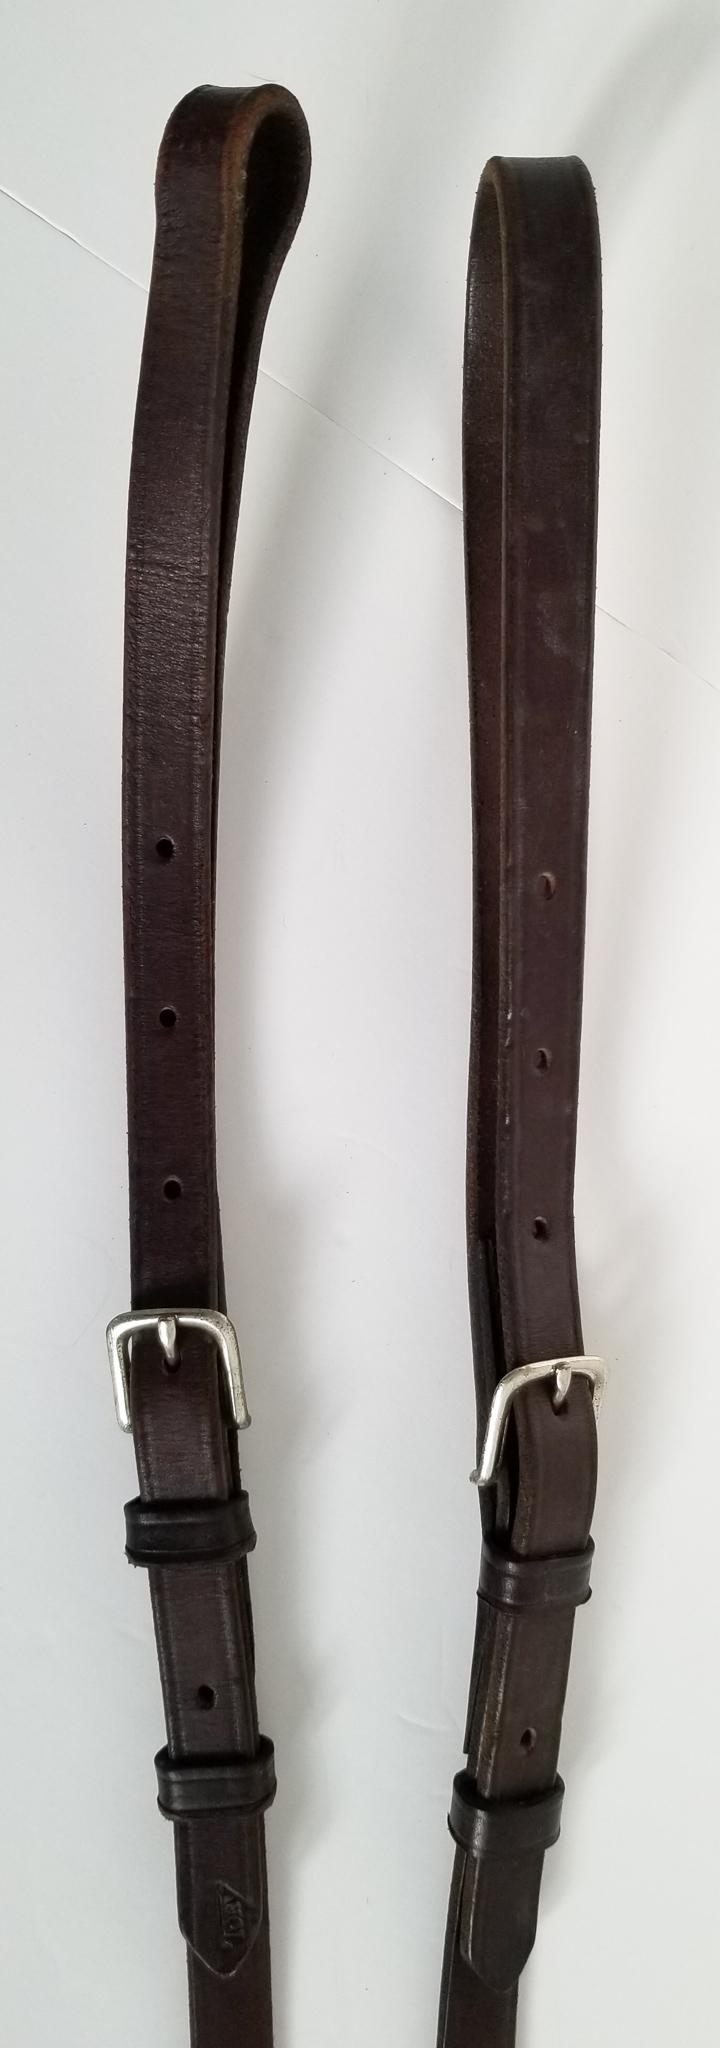 Tory Leather and Elastic Side Reins - Brown - One Size  (Adjustable)